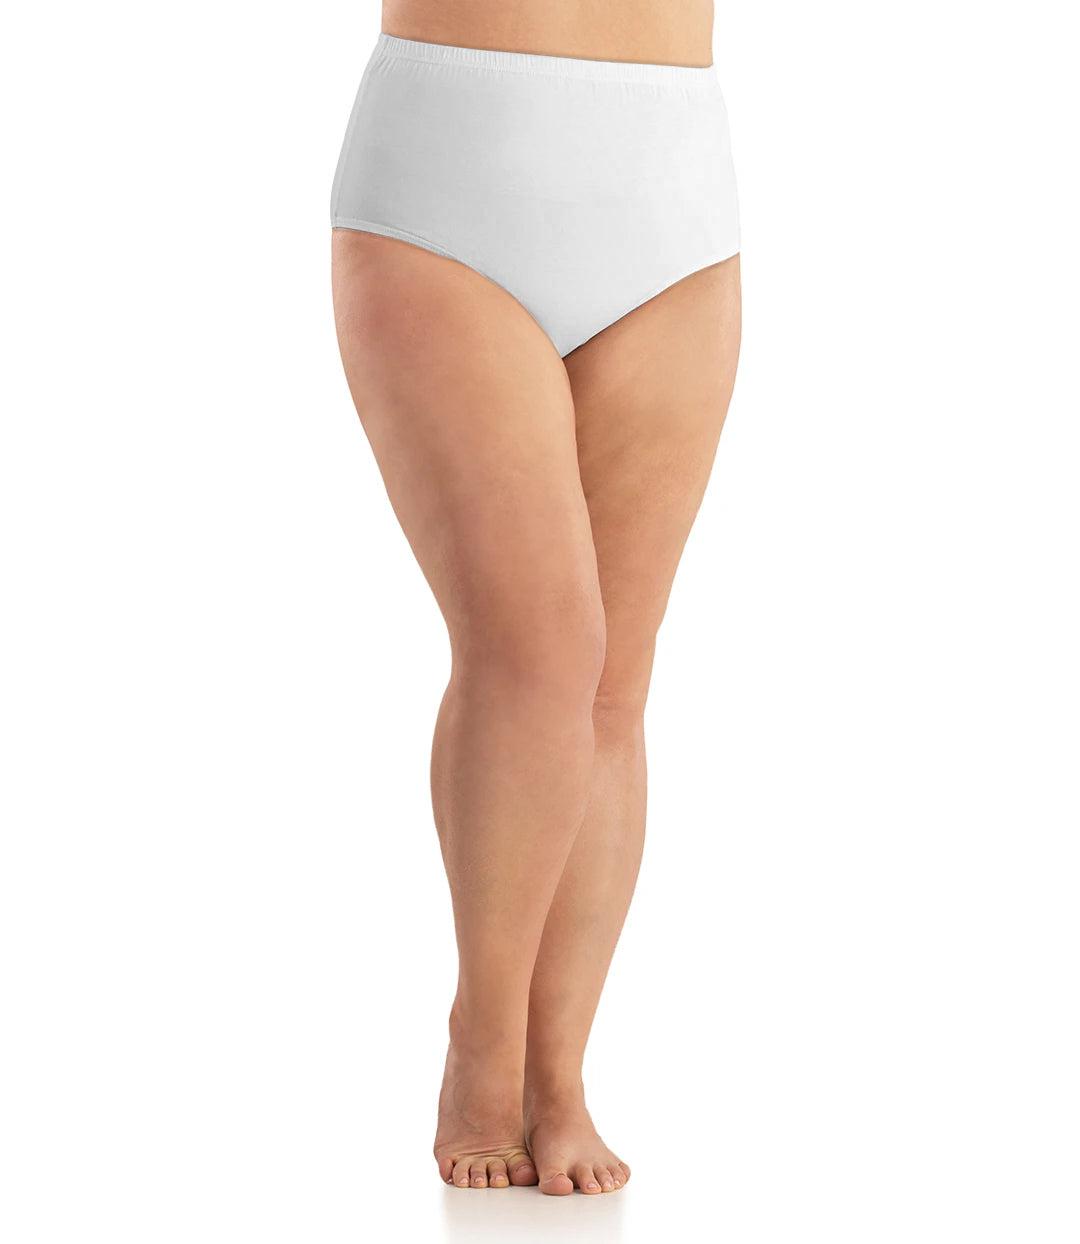 Bottom half of plus sized woman, facing front, wearing JunoActive Junowear Cotton Stretch Classic Full Fit Brief in white. This brief has a high waist fit with conservative leg opening.